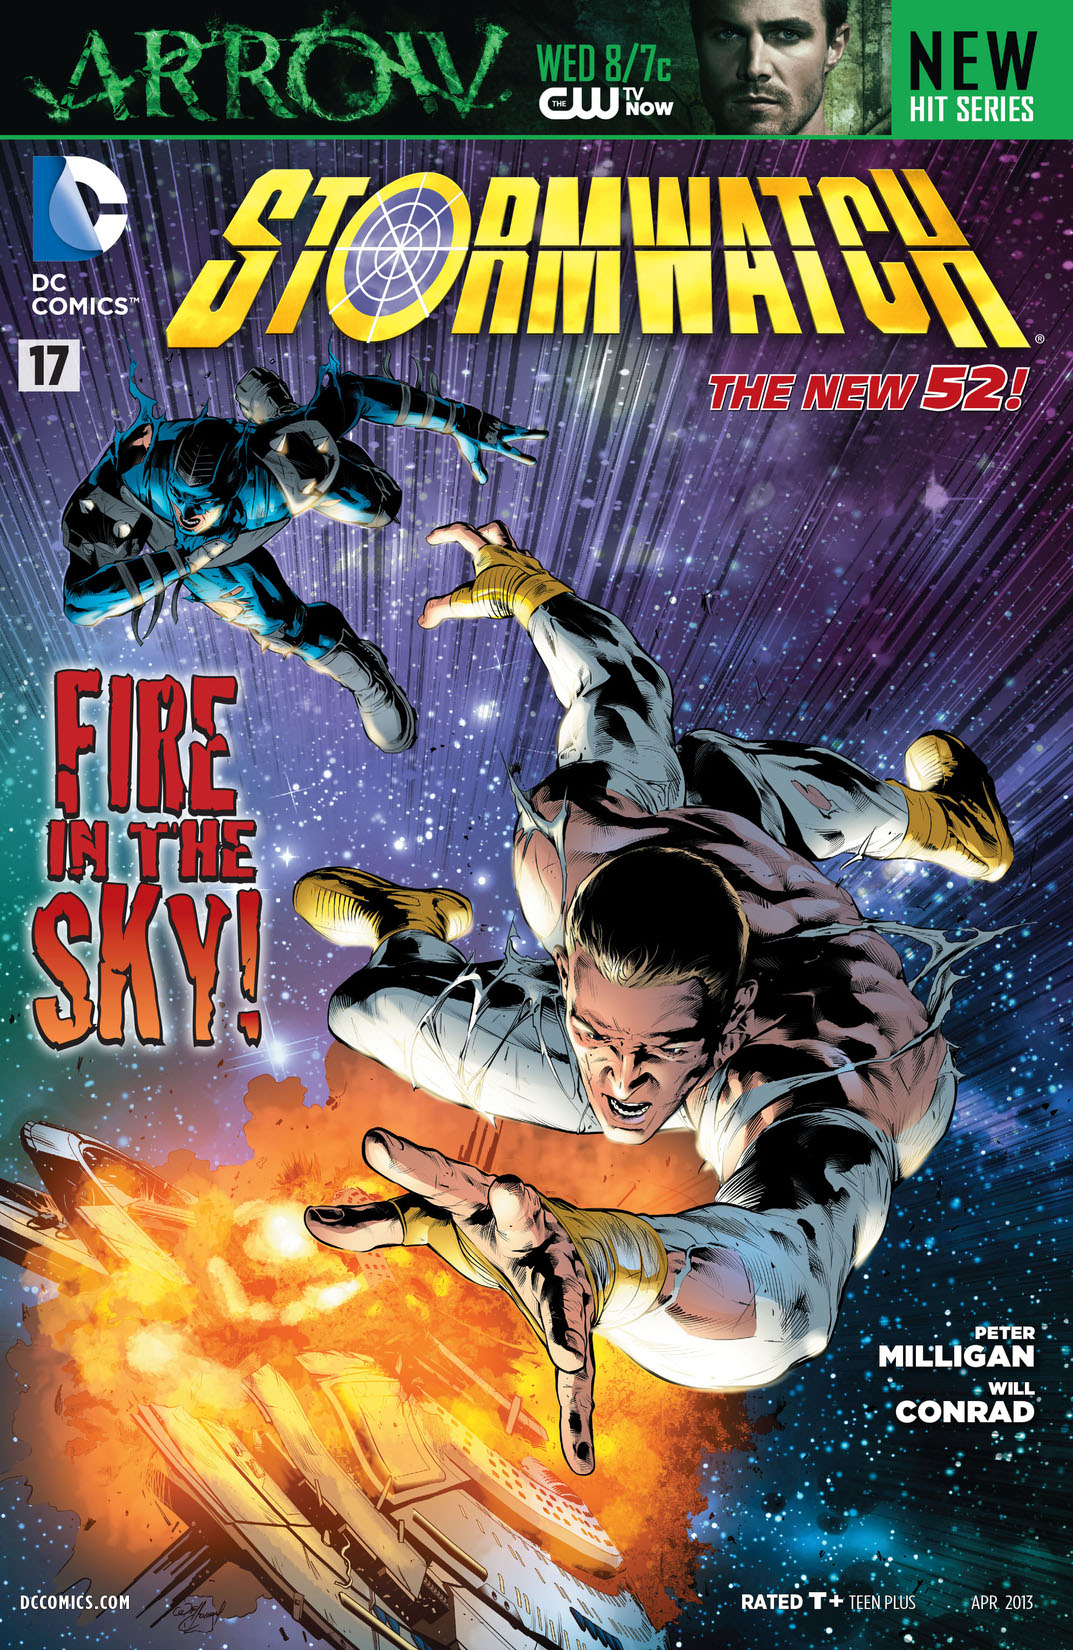 Stormwatch (2011-) #17 preview images